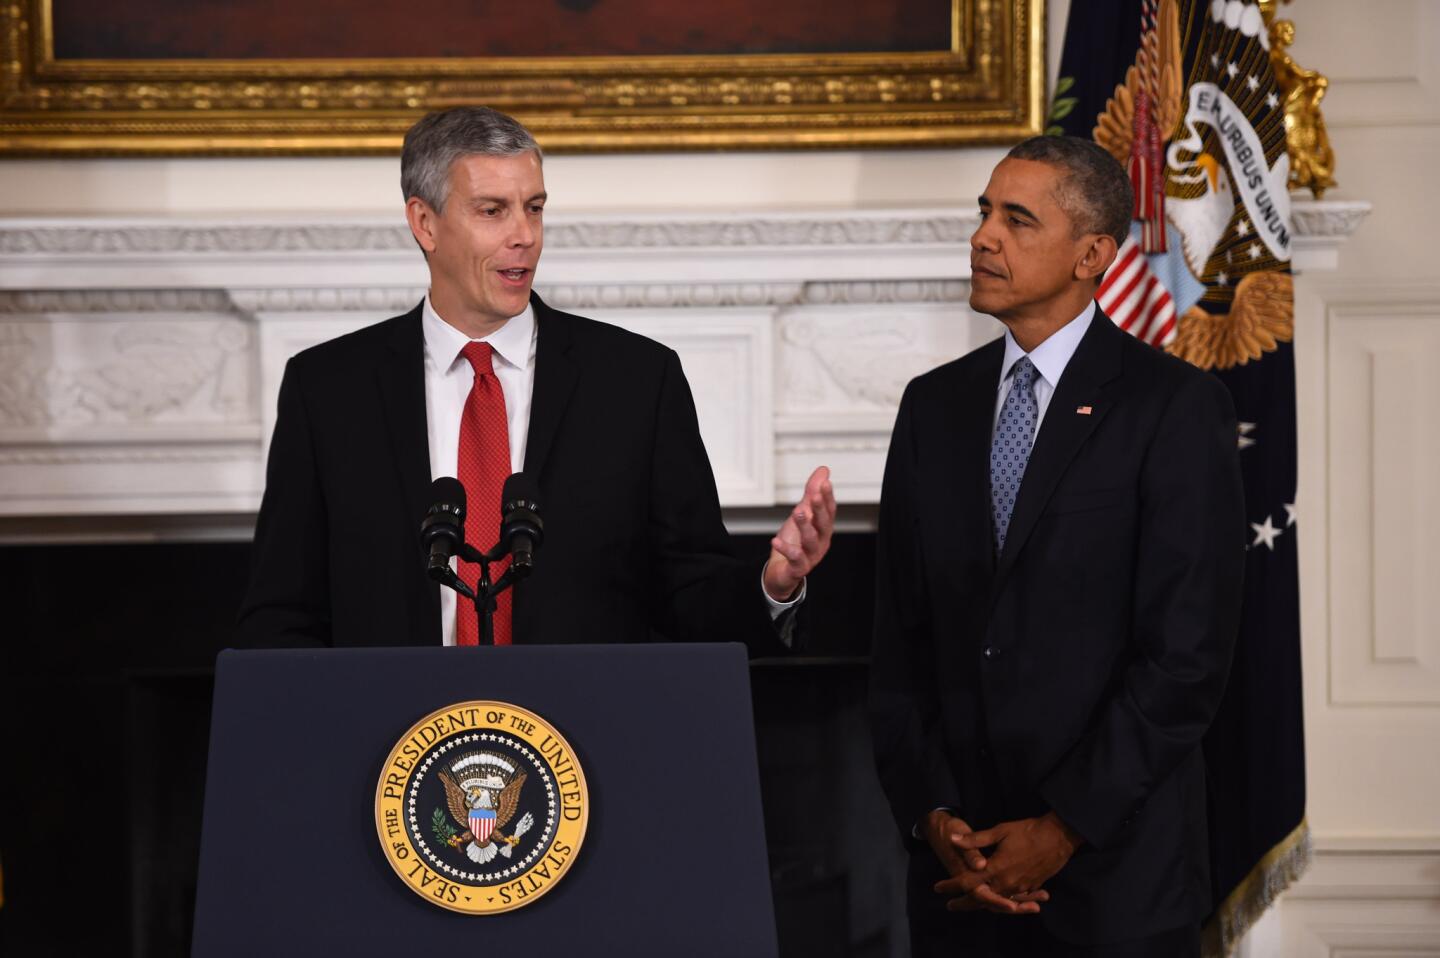 President Barack Obama listens as outgoing Education Secretary Arne Duncan speaks during a news conference at the White House on Oct. 2, 2015. Obama nominated John King Jr. to replace Duncan.